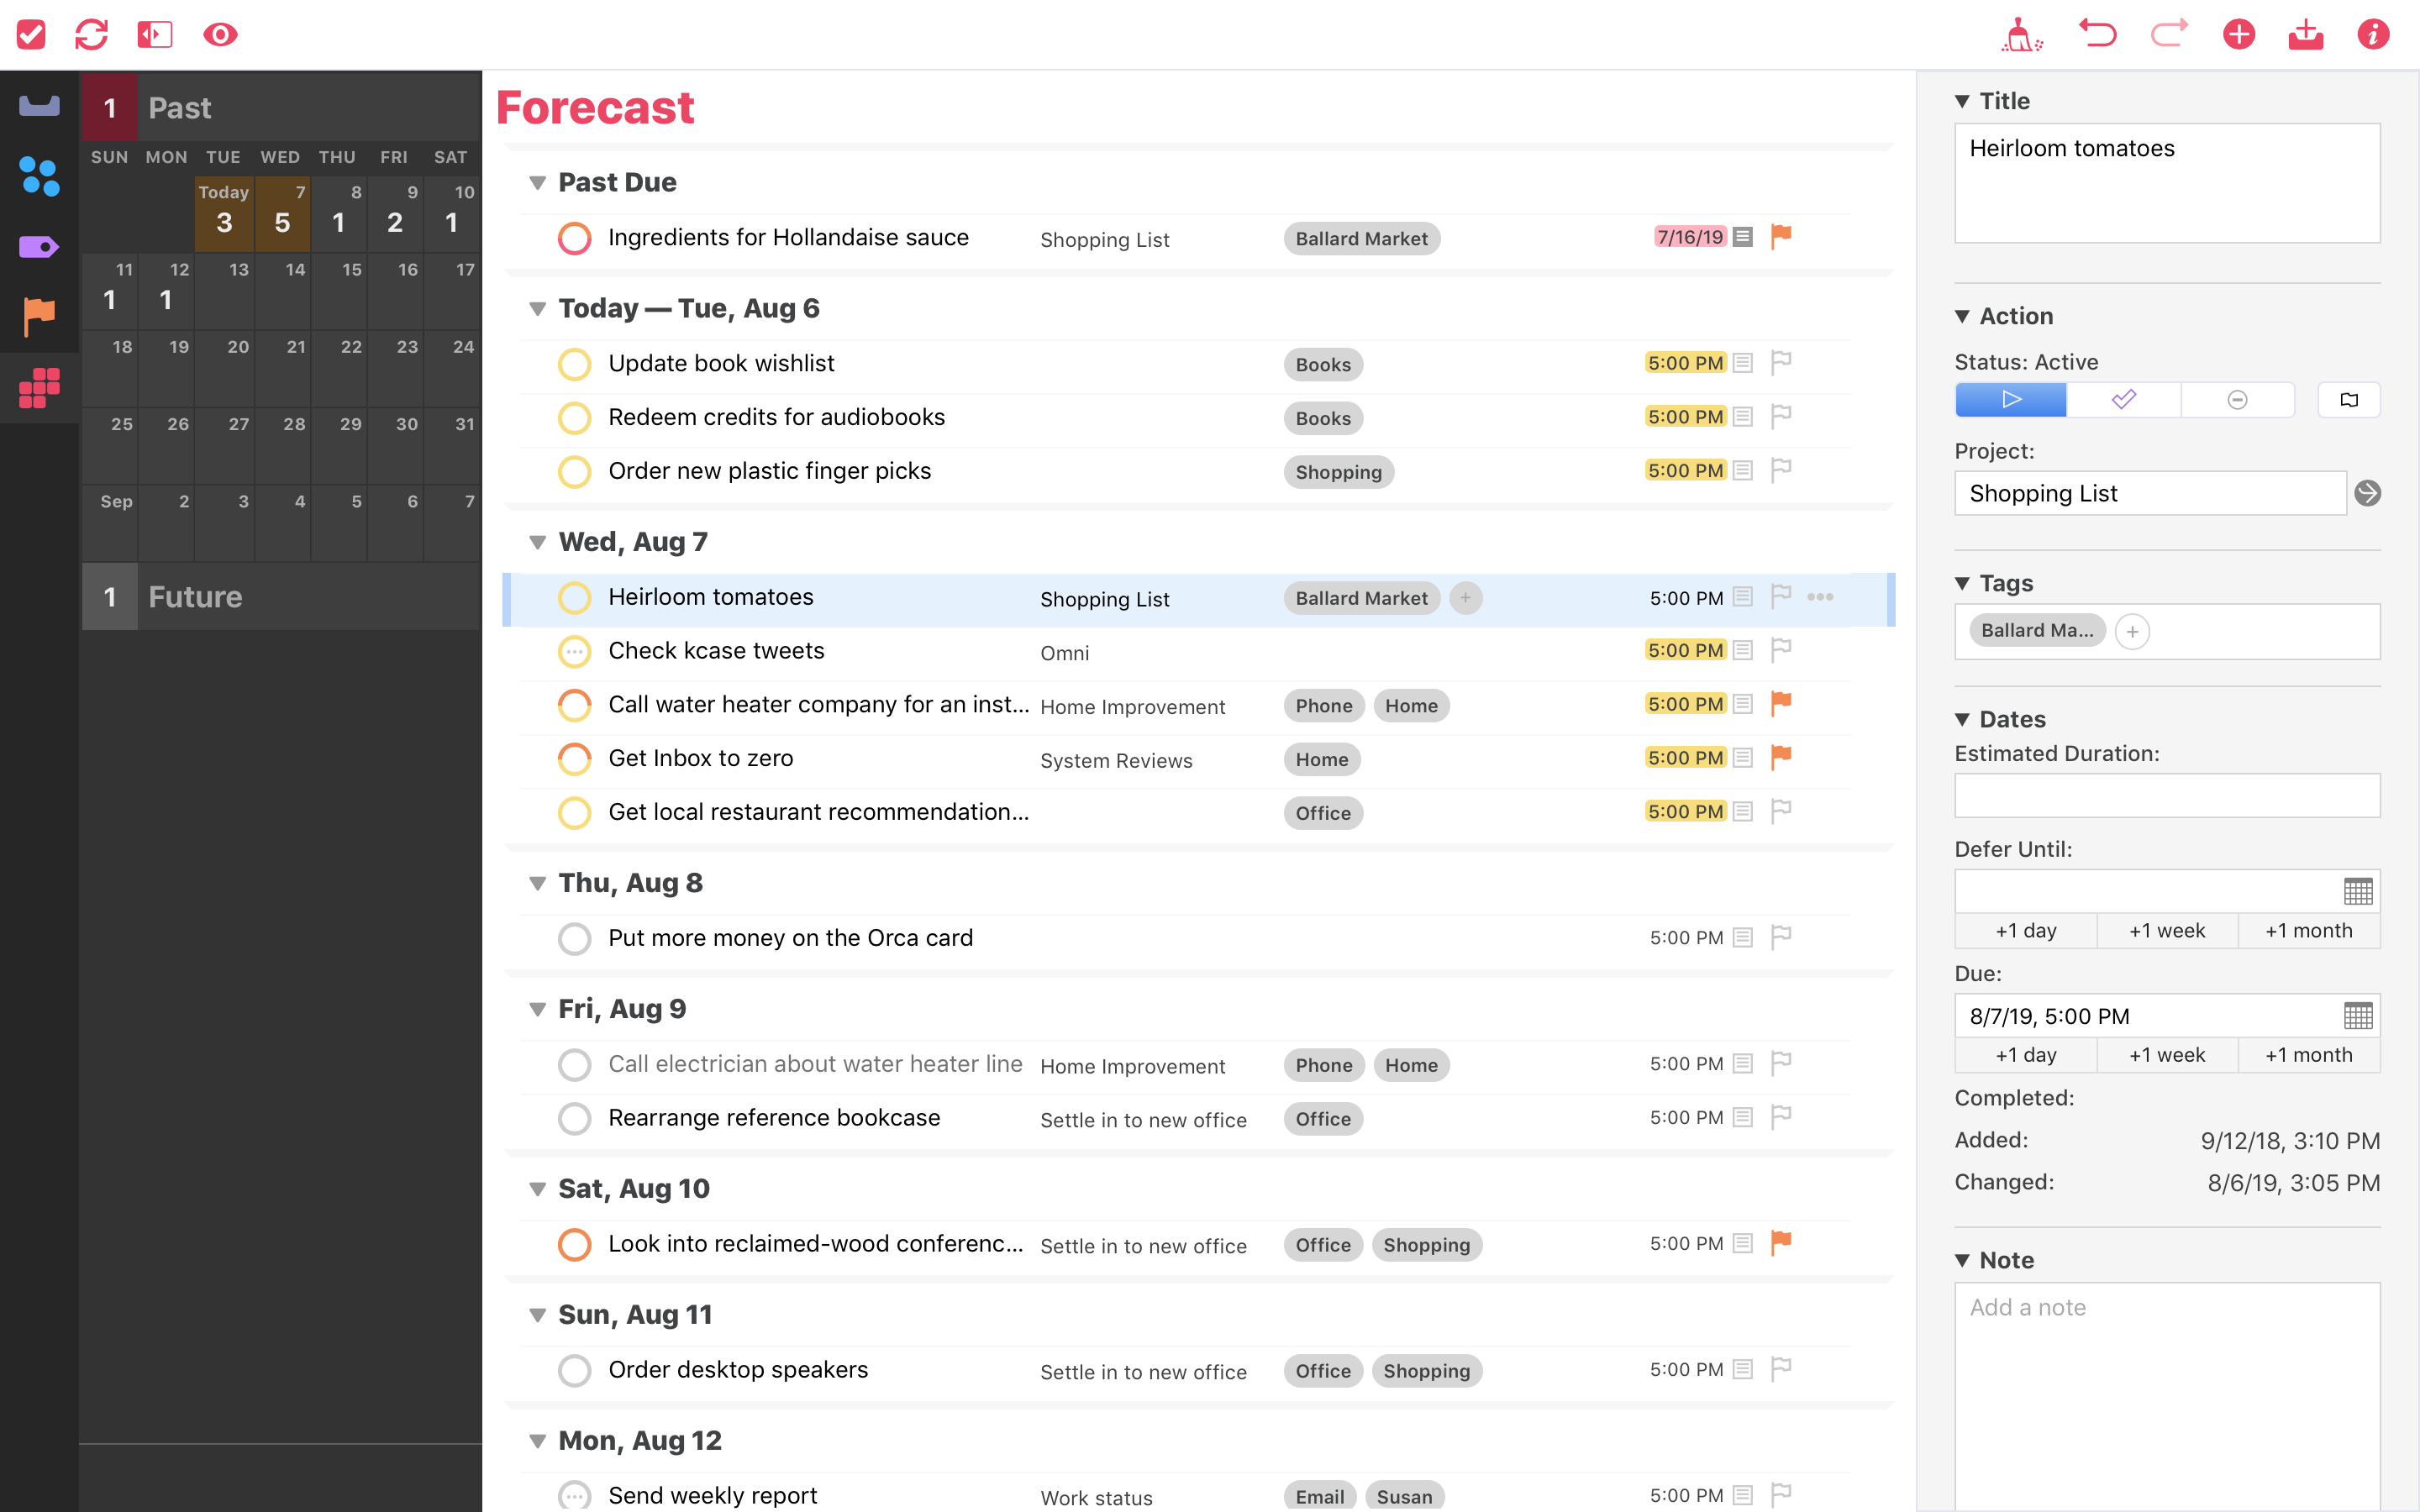 Screenshot of the Forecast view in OmniFocus for the Web.